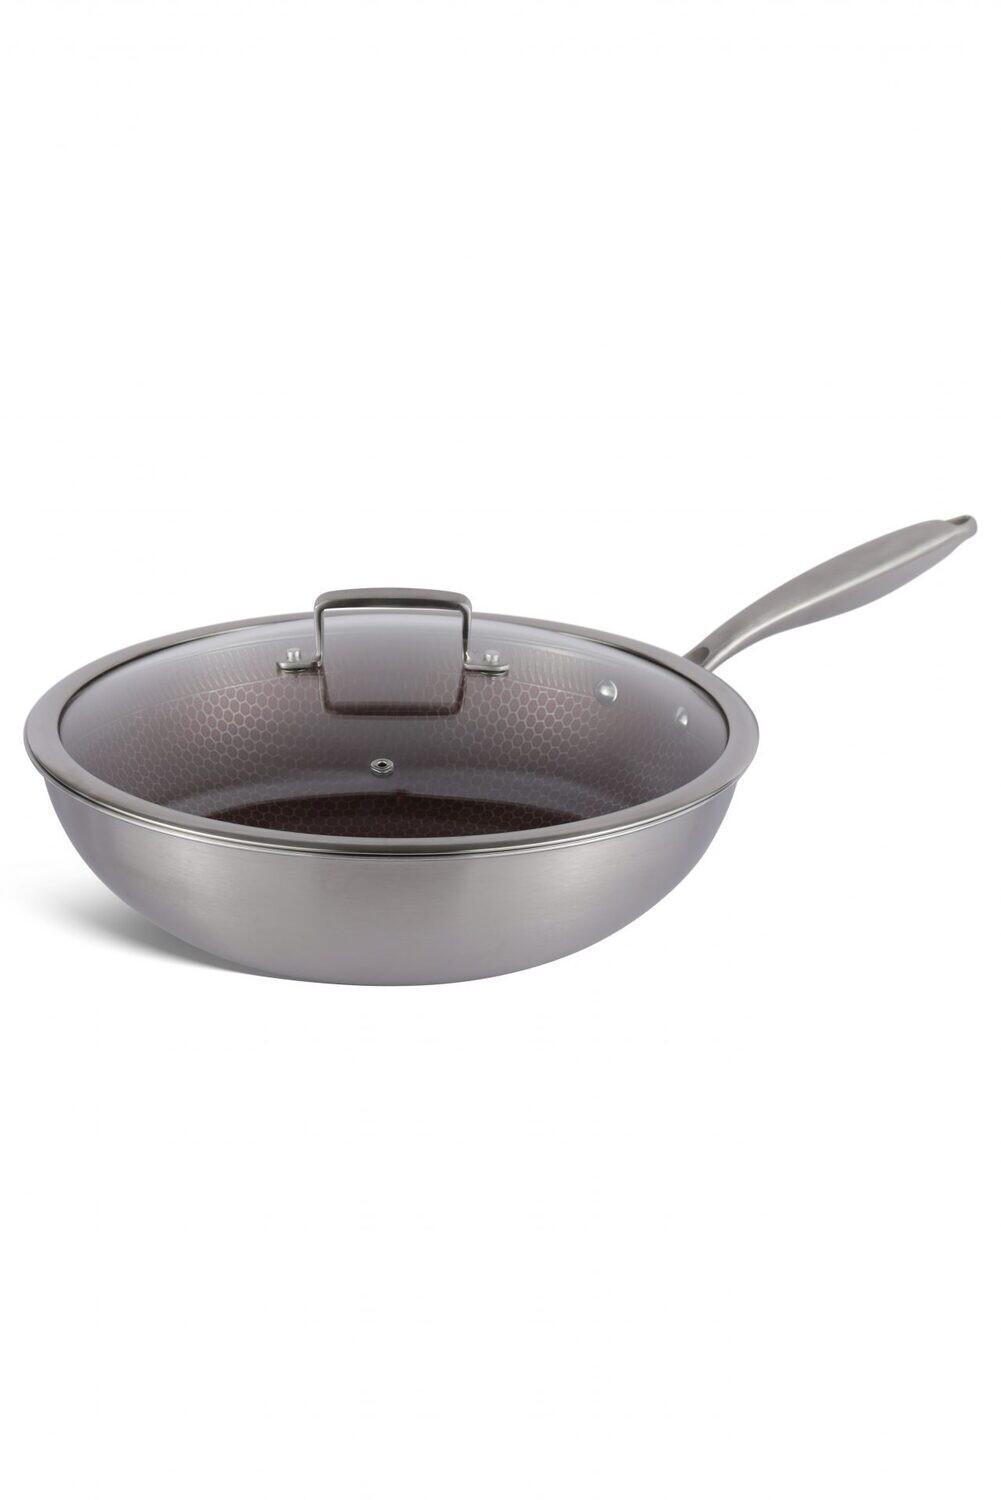 Edenberg Wok Pan 30cm Tri-Ply Stainless Steel induction friendly Cookware EB-14109